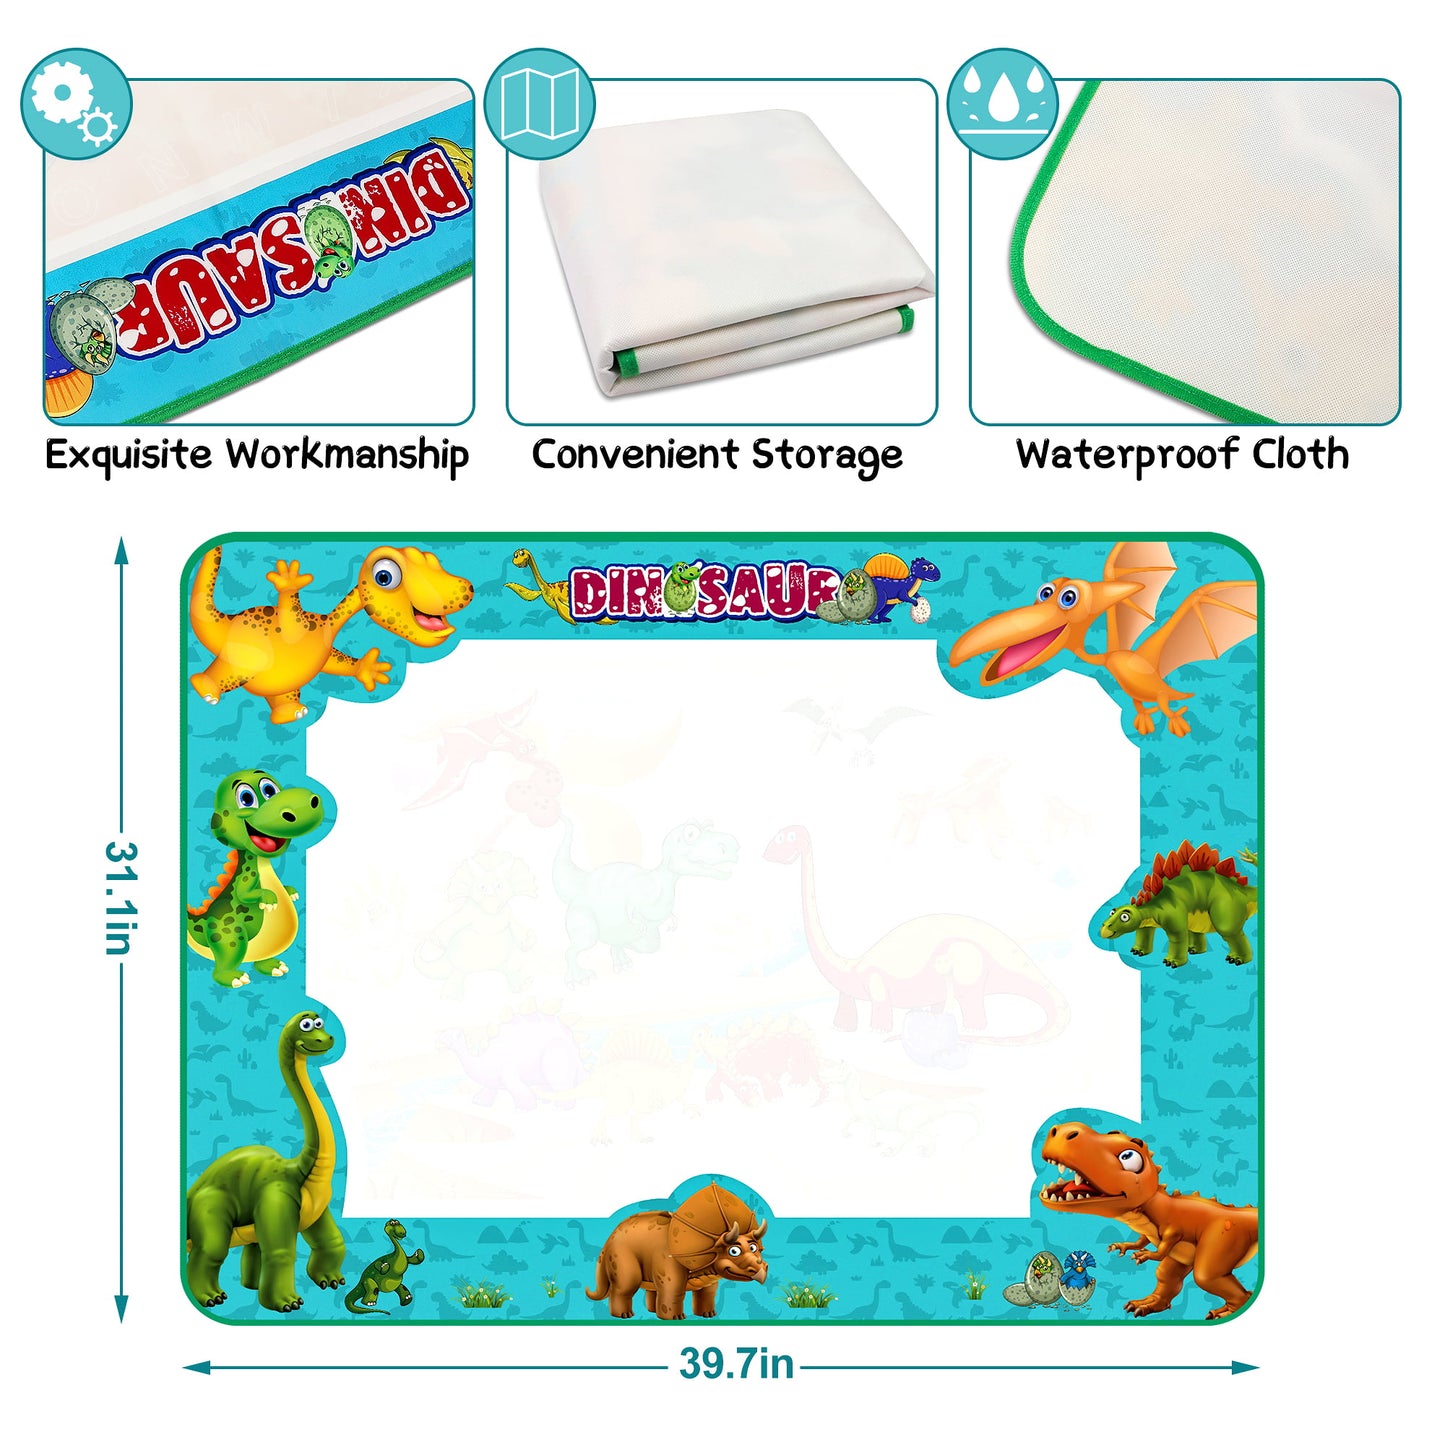 Doodle Mat for Toddlers, Dinosaur Water Drawing Mat, Large Aqua Mat with Magic Color Pen, Educational Learning Toys Christmas Gifts for Girls Boys Age 2-4 5-7, Art Supplies Birthday Gifts